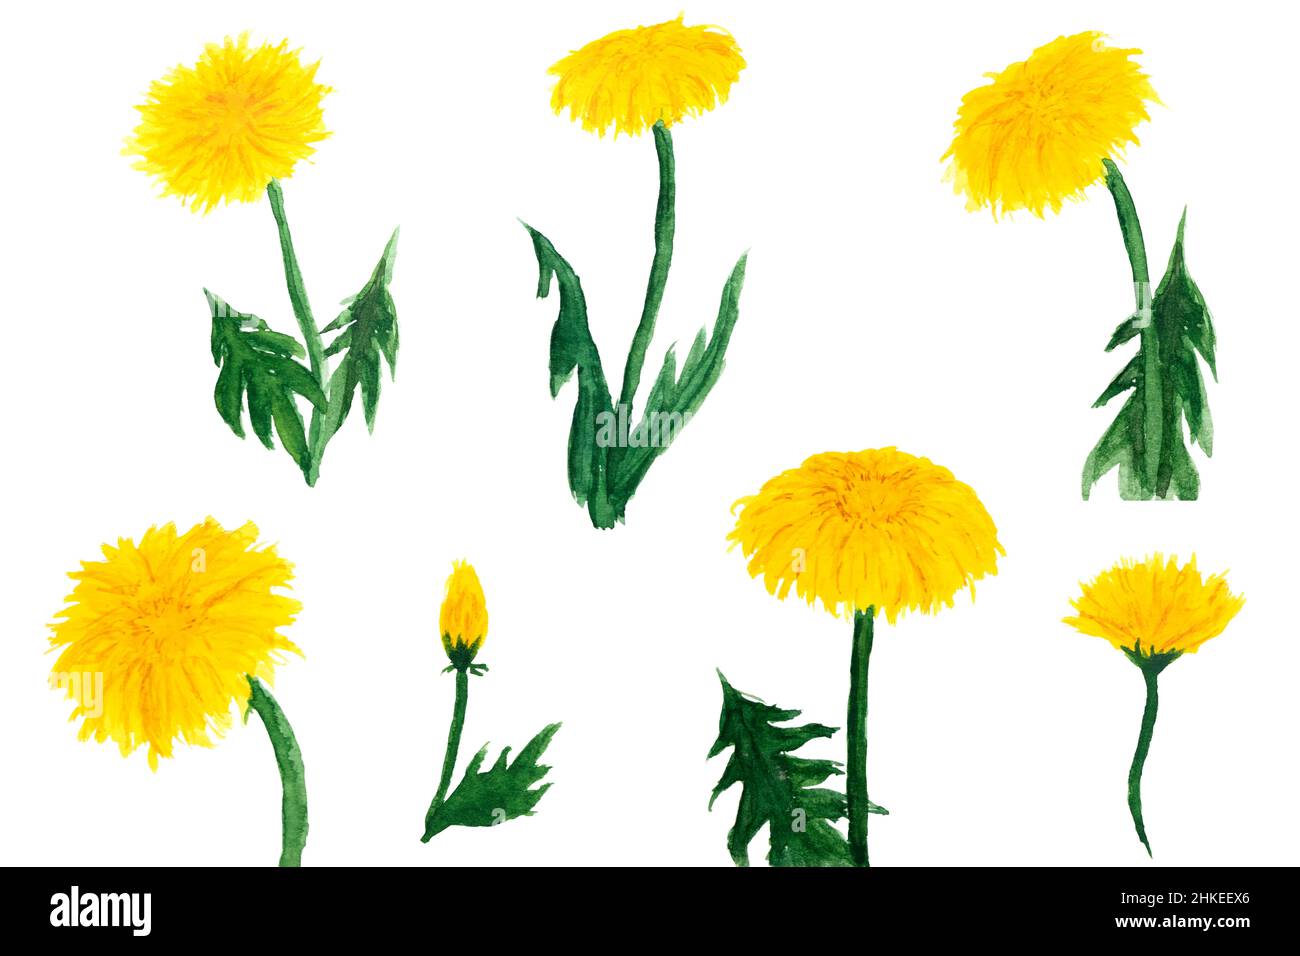 Watercolor drawing of yellow dandelion flowers set isolated on white background. Taraxacum officinale, blowball aquarell painting of dandelion plants. Stock Photo